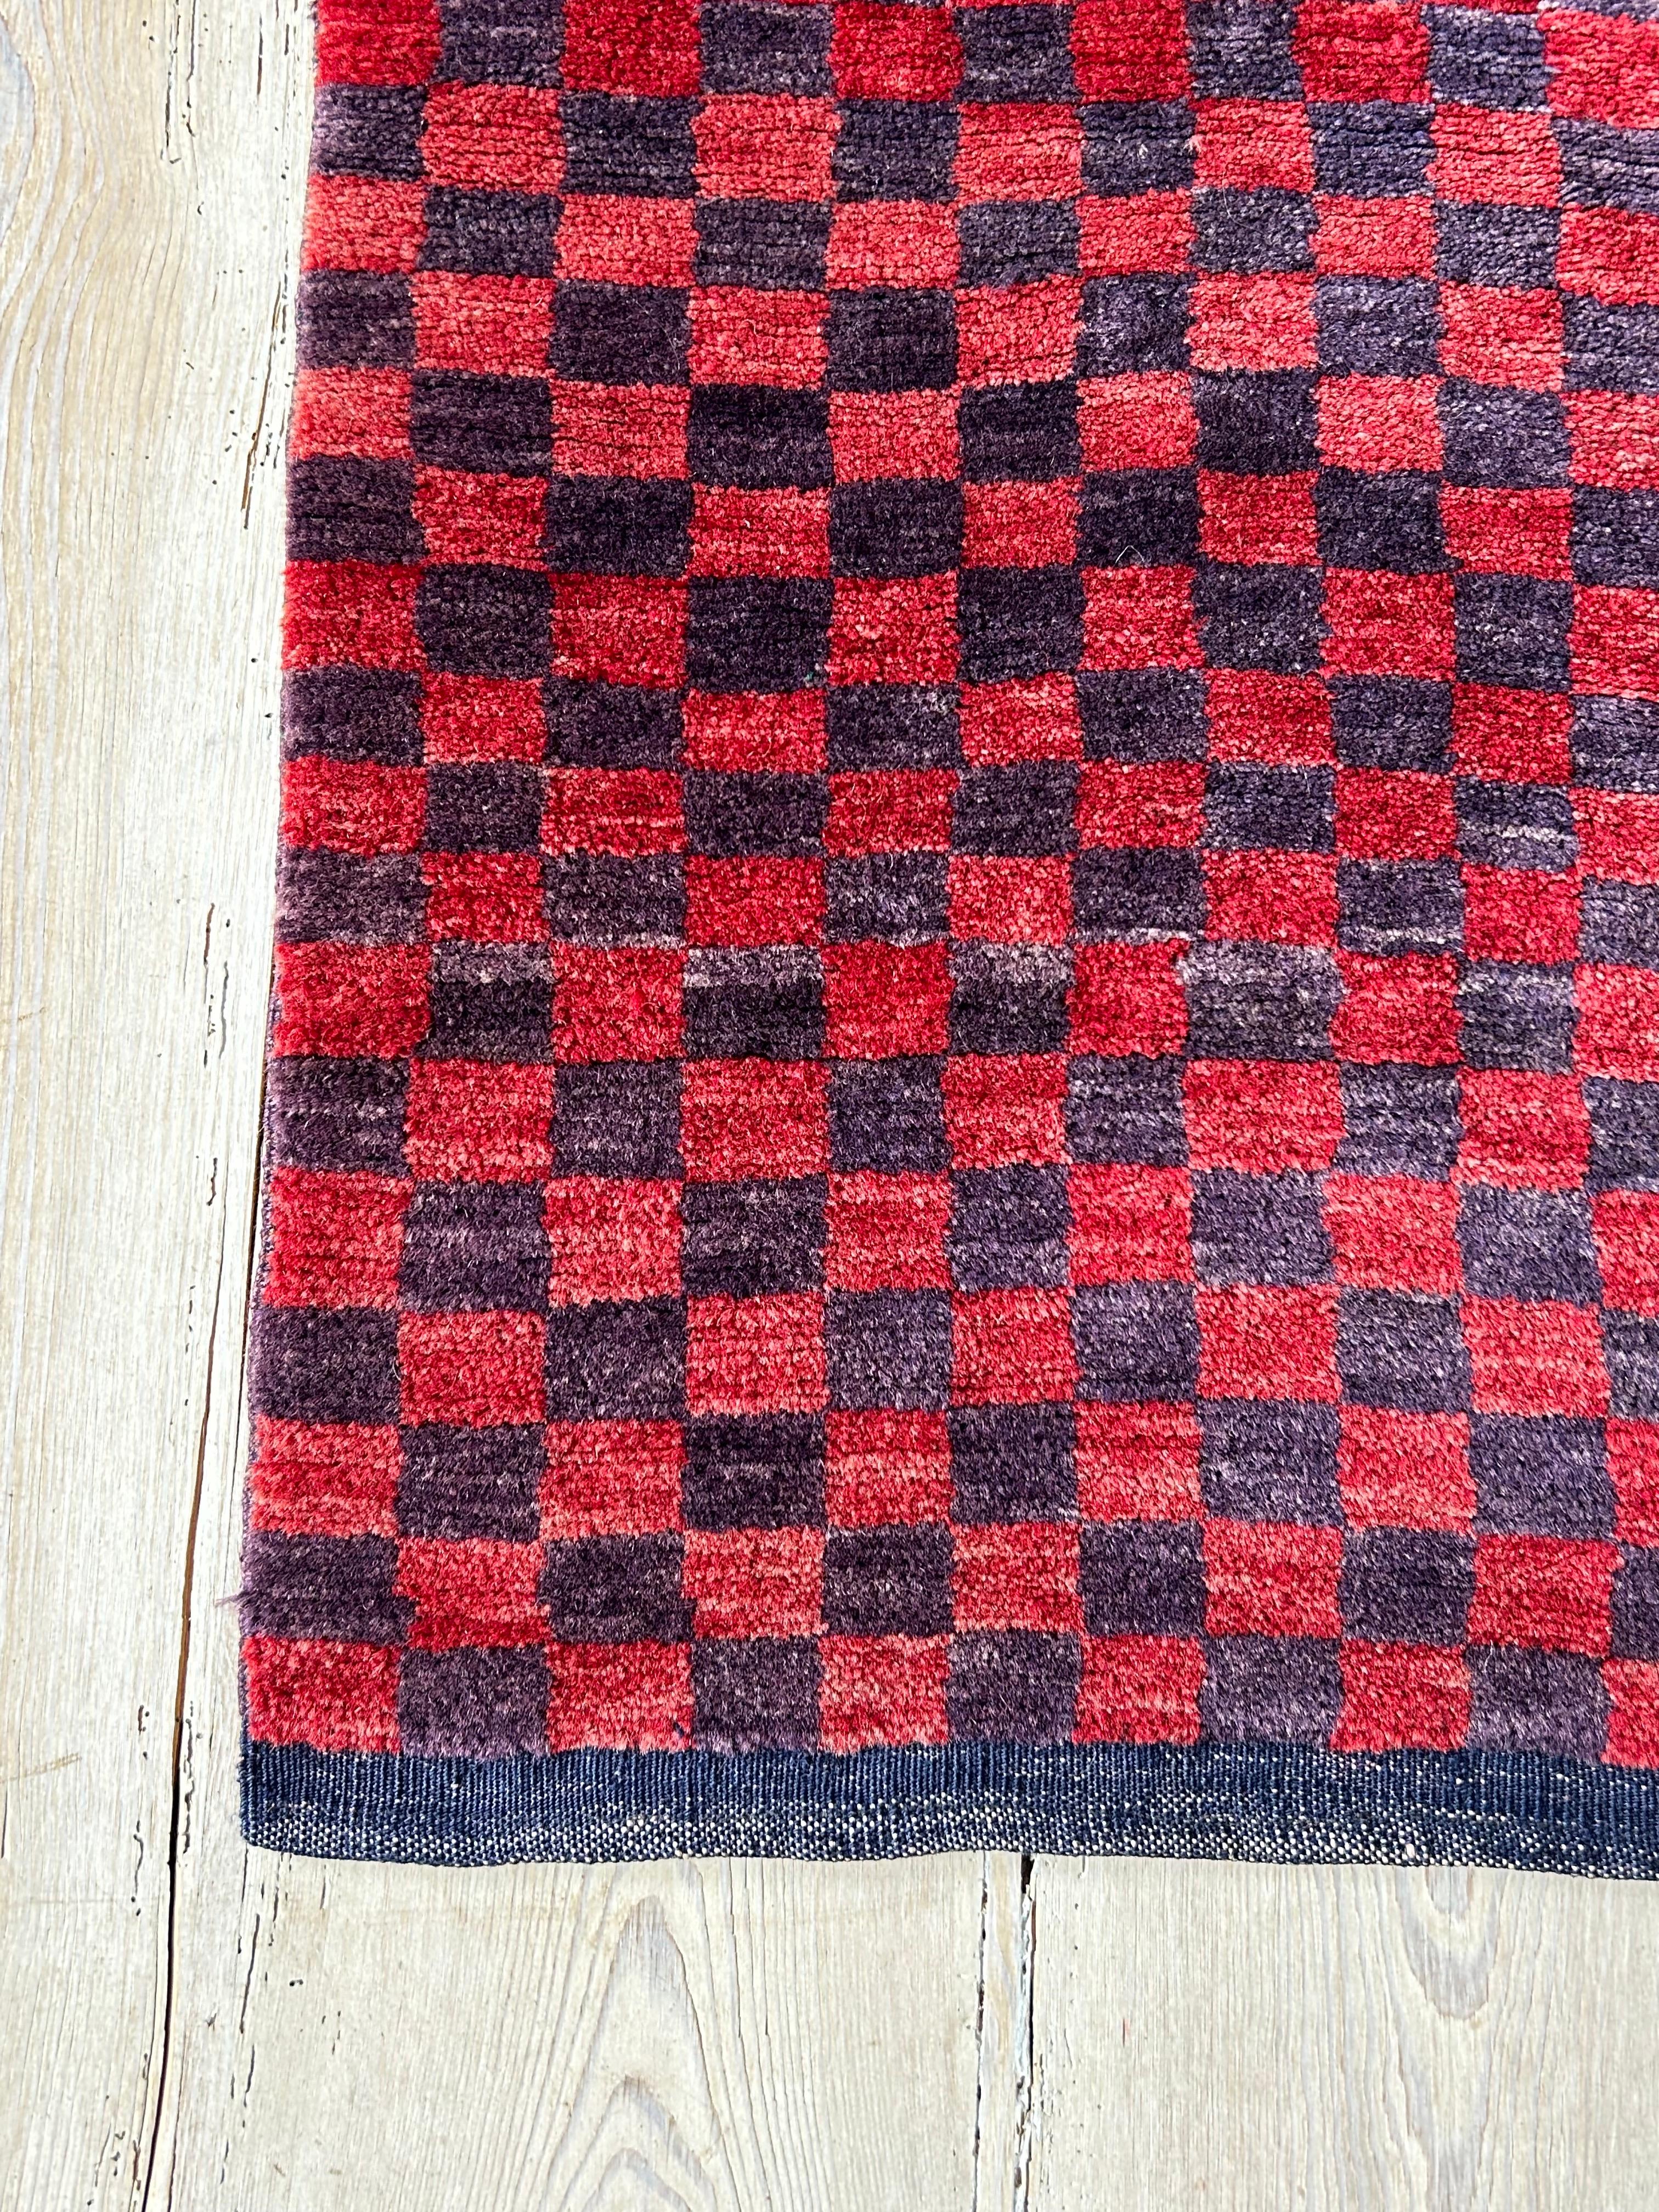 Wool Vintage Tulu Rug with Red and Purple Check Pattern, Turkey, 20th Century For Sale